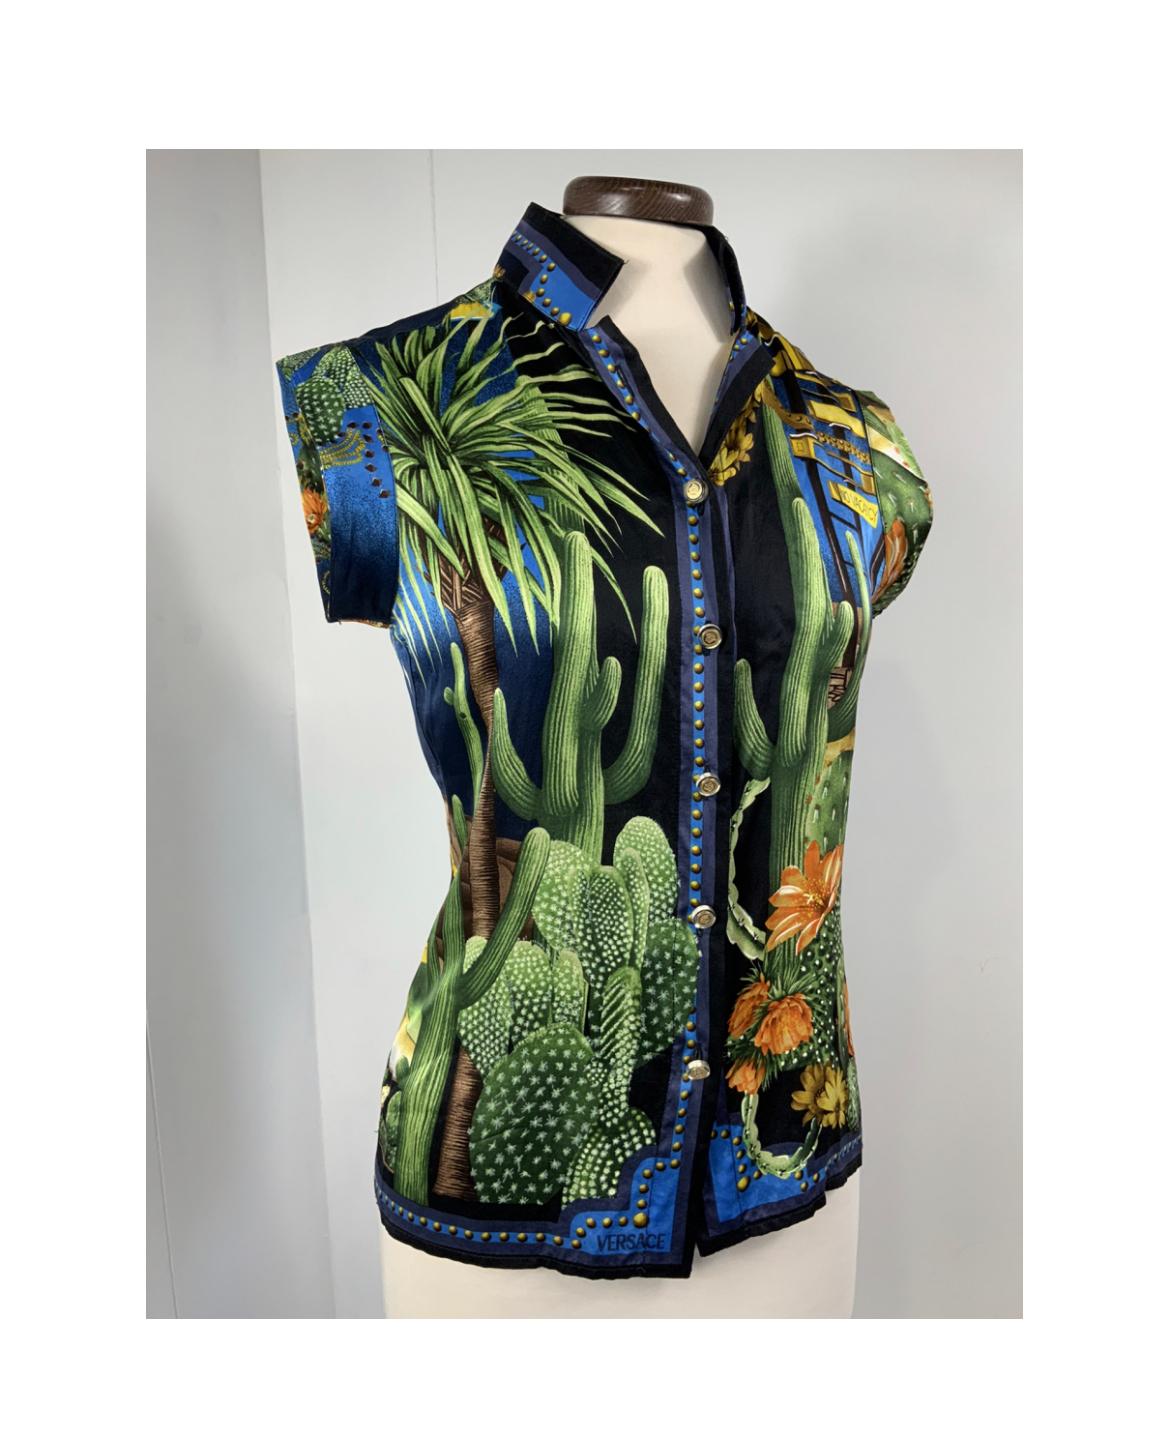 Black Versace shirt with cactus print. For Sale